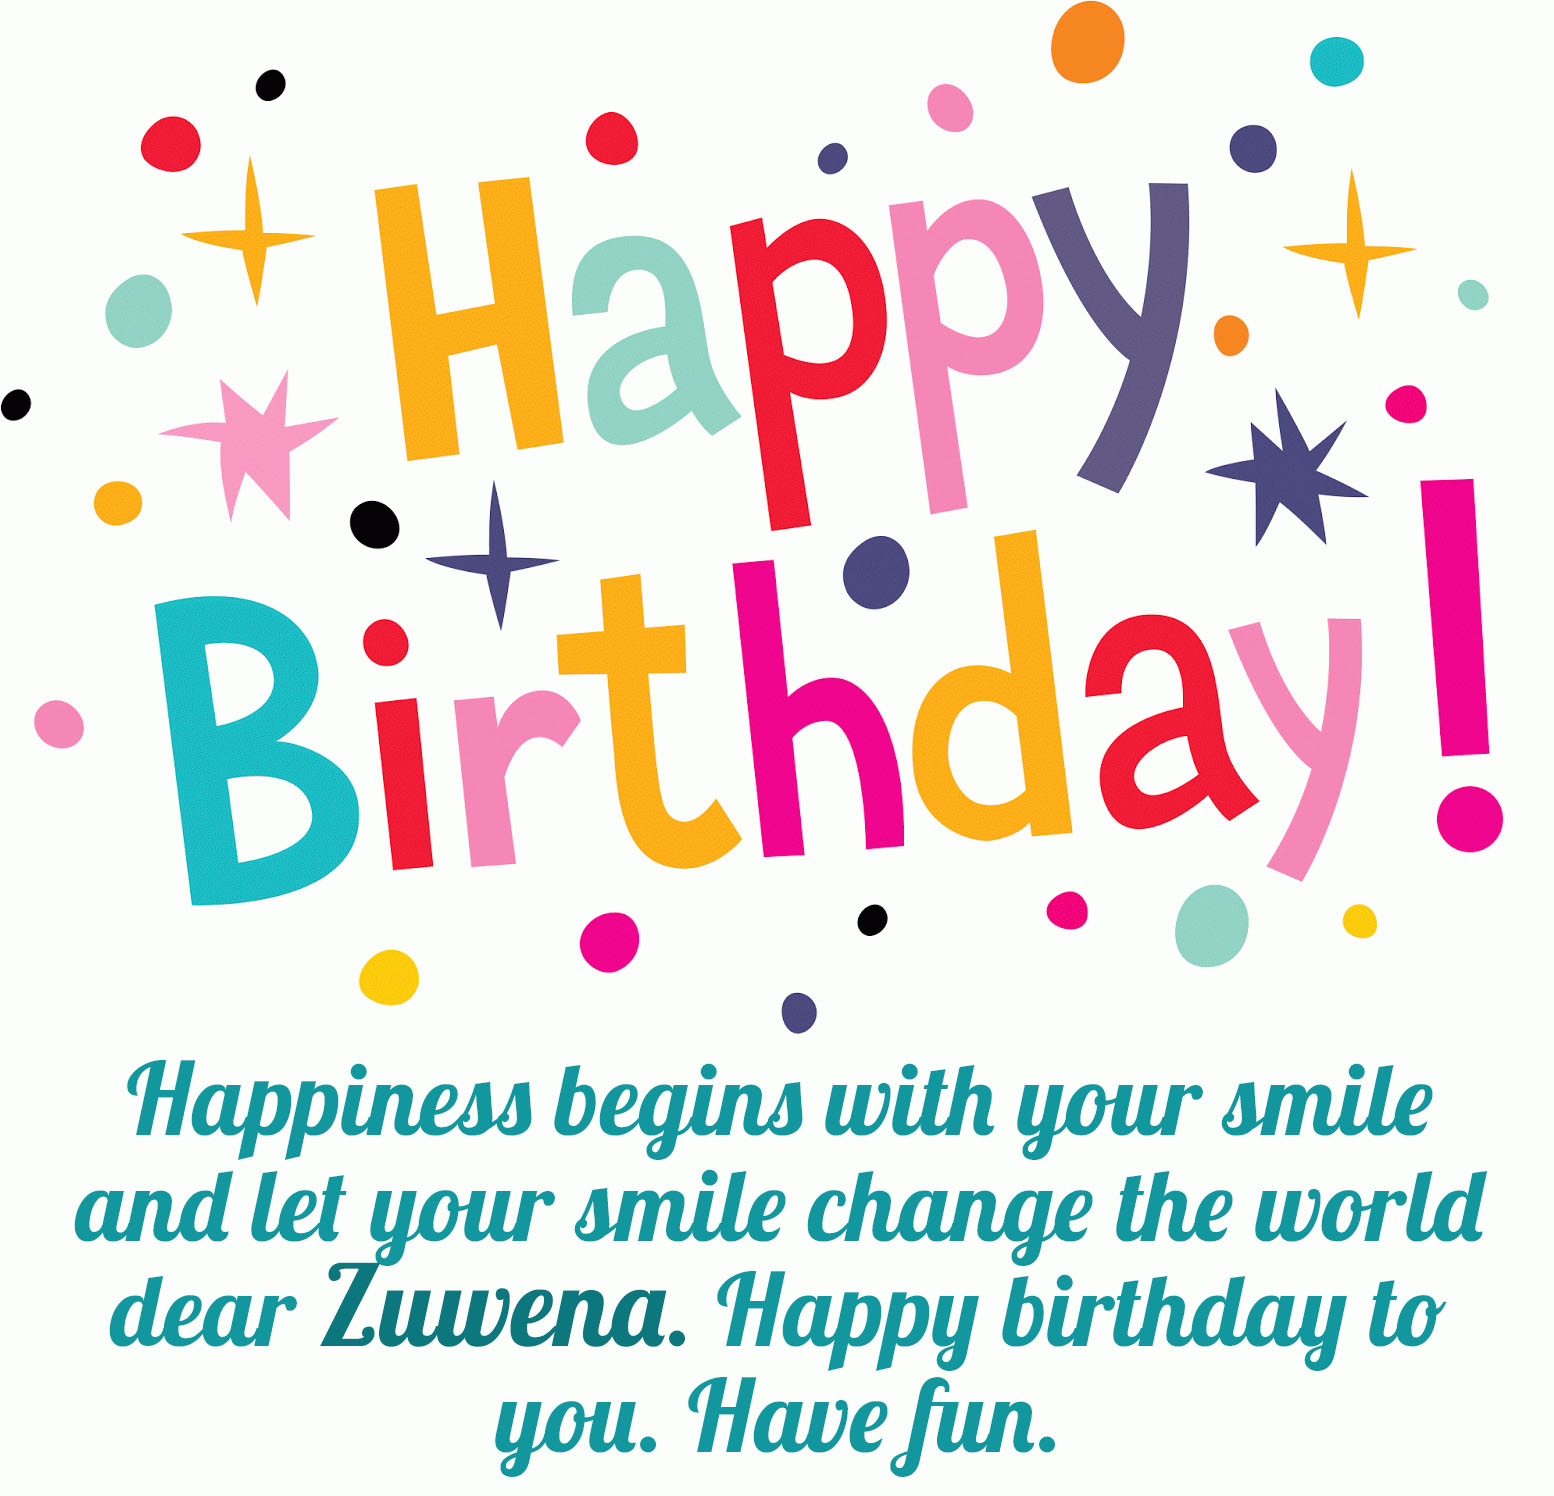 images with names Have fun and Happy Birthday Zuwena!